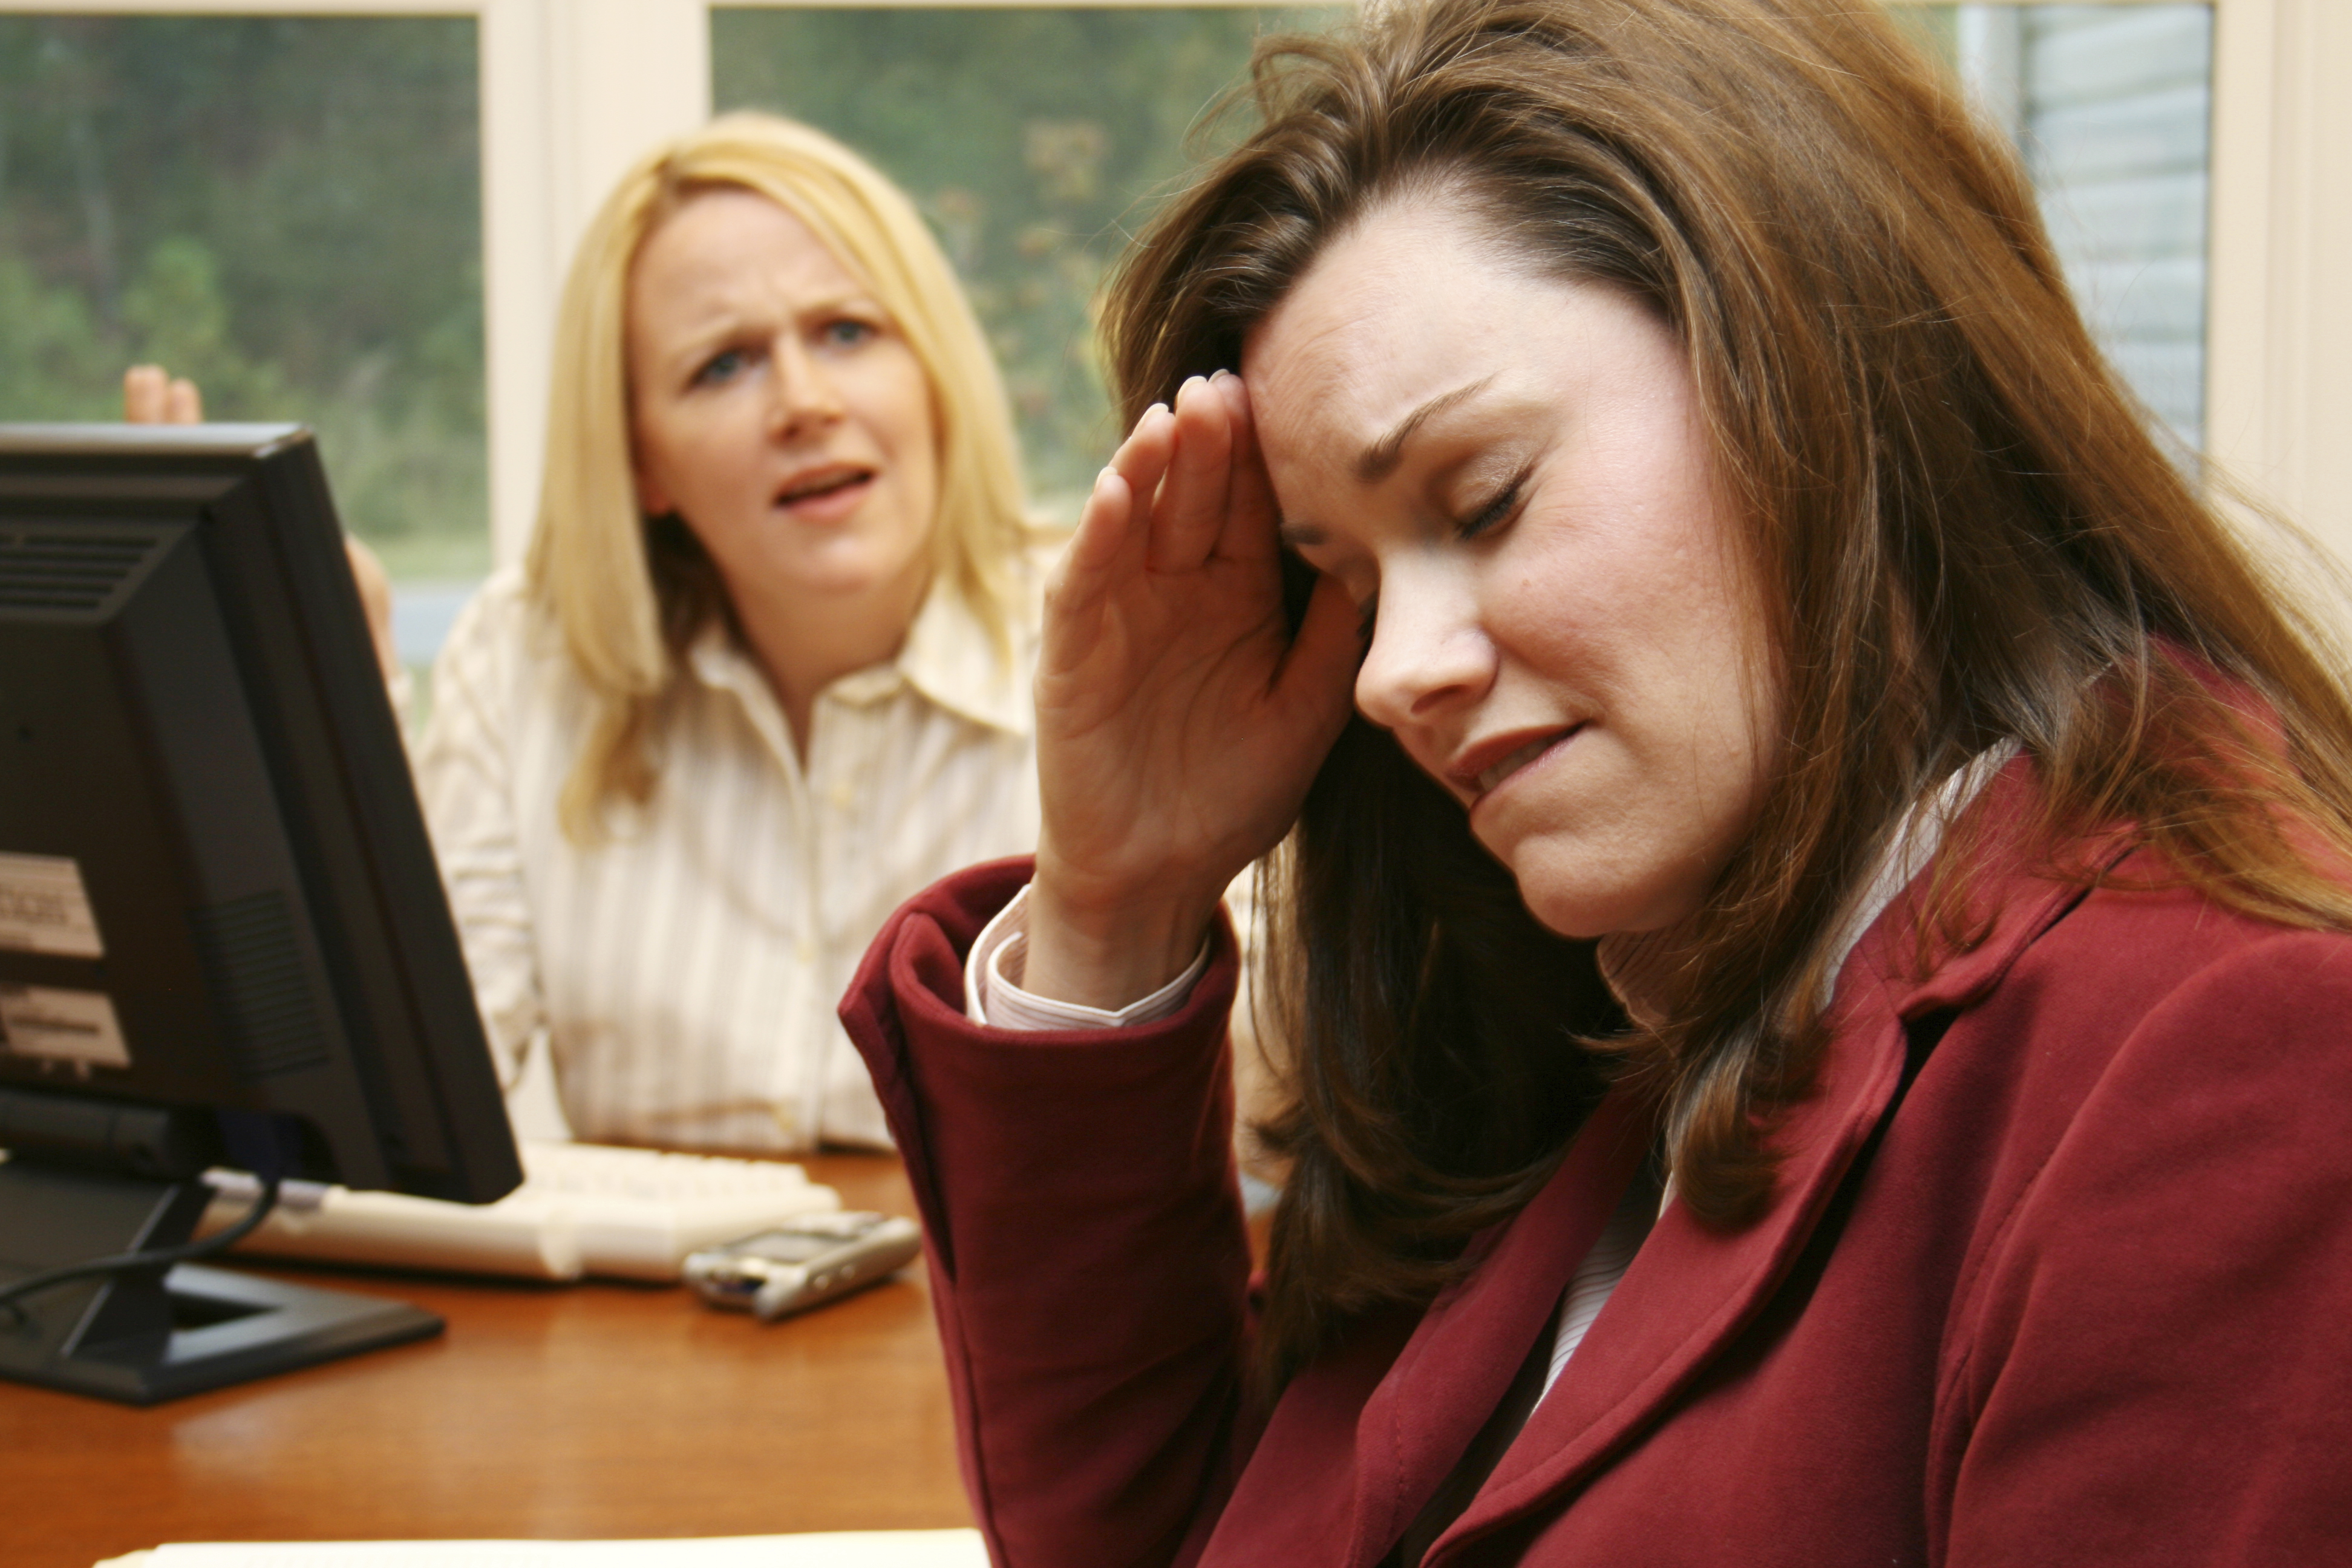 two women in an office setting, one in the background angrily speaking to the one in the foreground, who is holding her forehead as if she has a headache